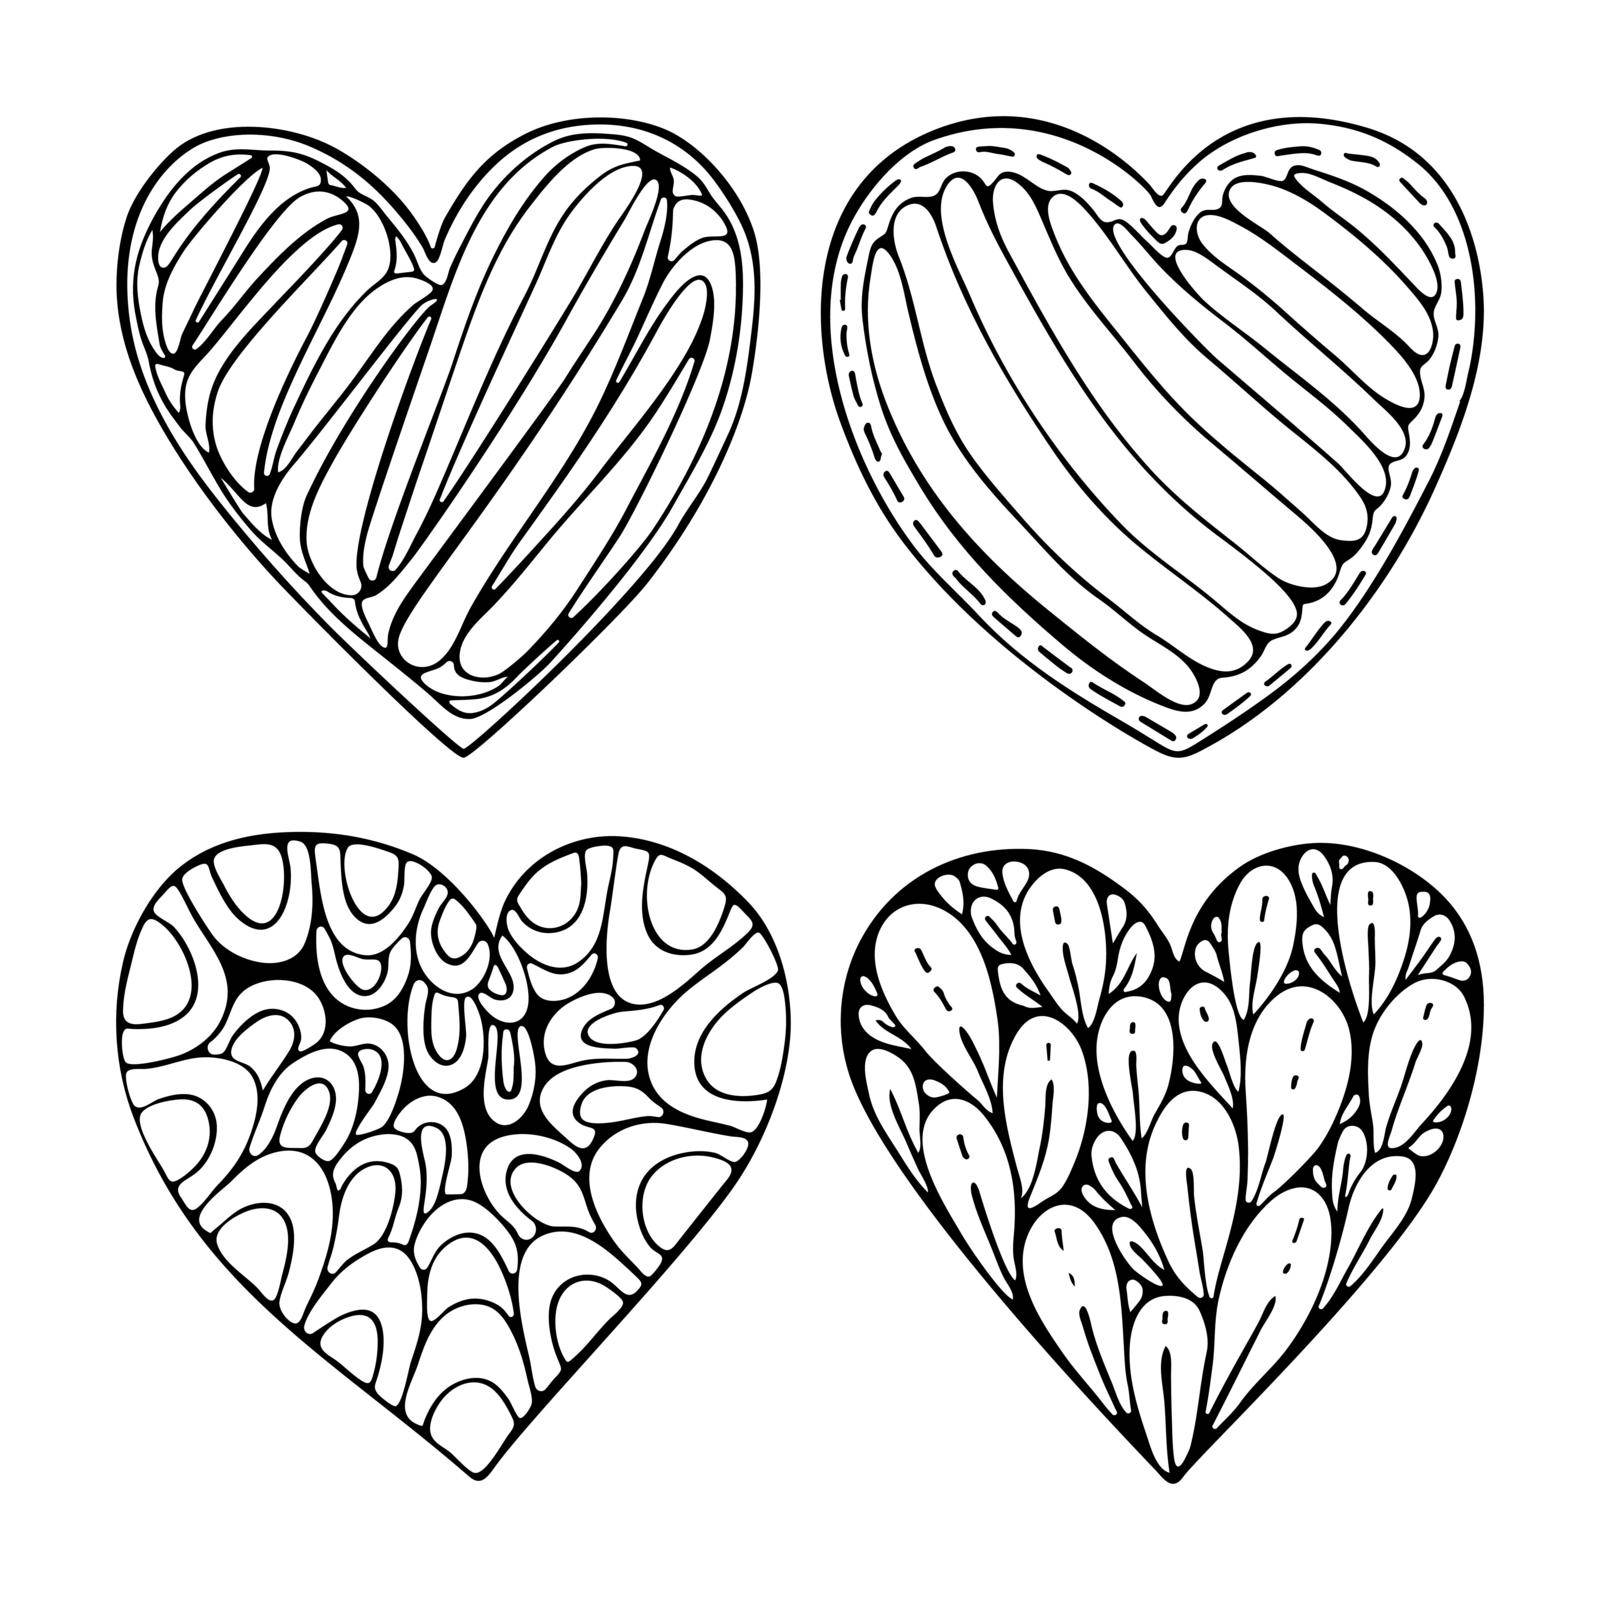 Set hearts doodle line art. Romantic symbol of love with different patterns. Hand drawn vector graphic black and white illustration.